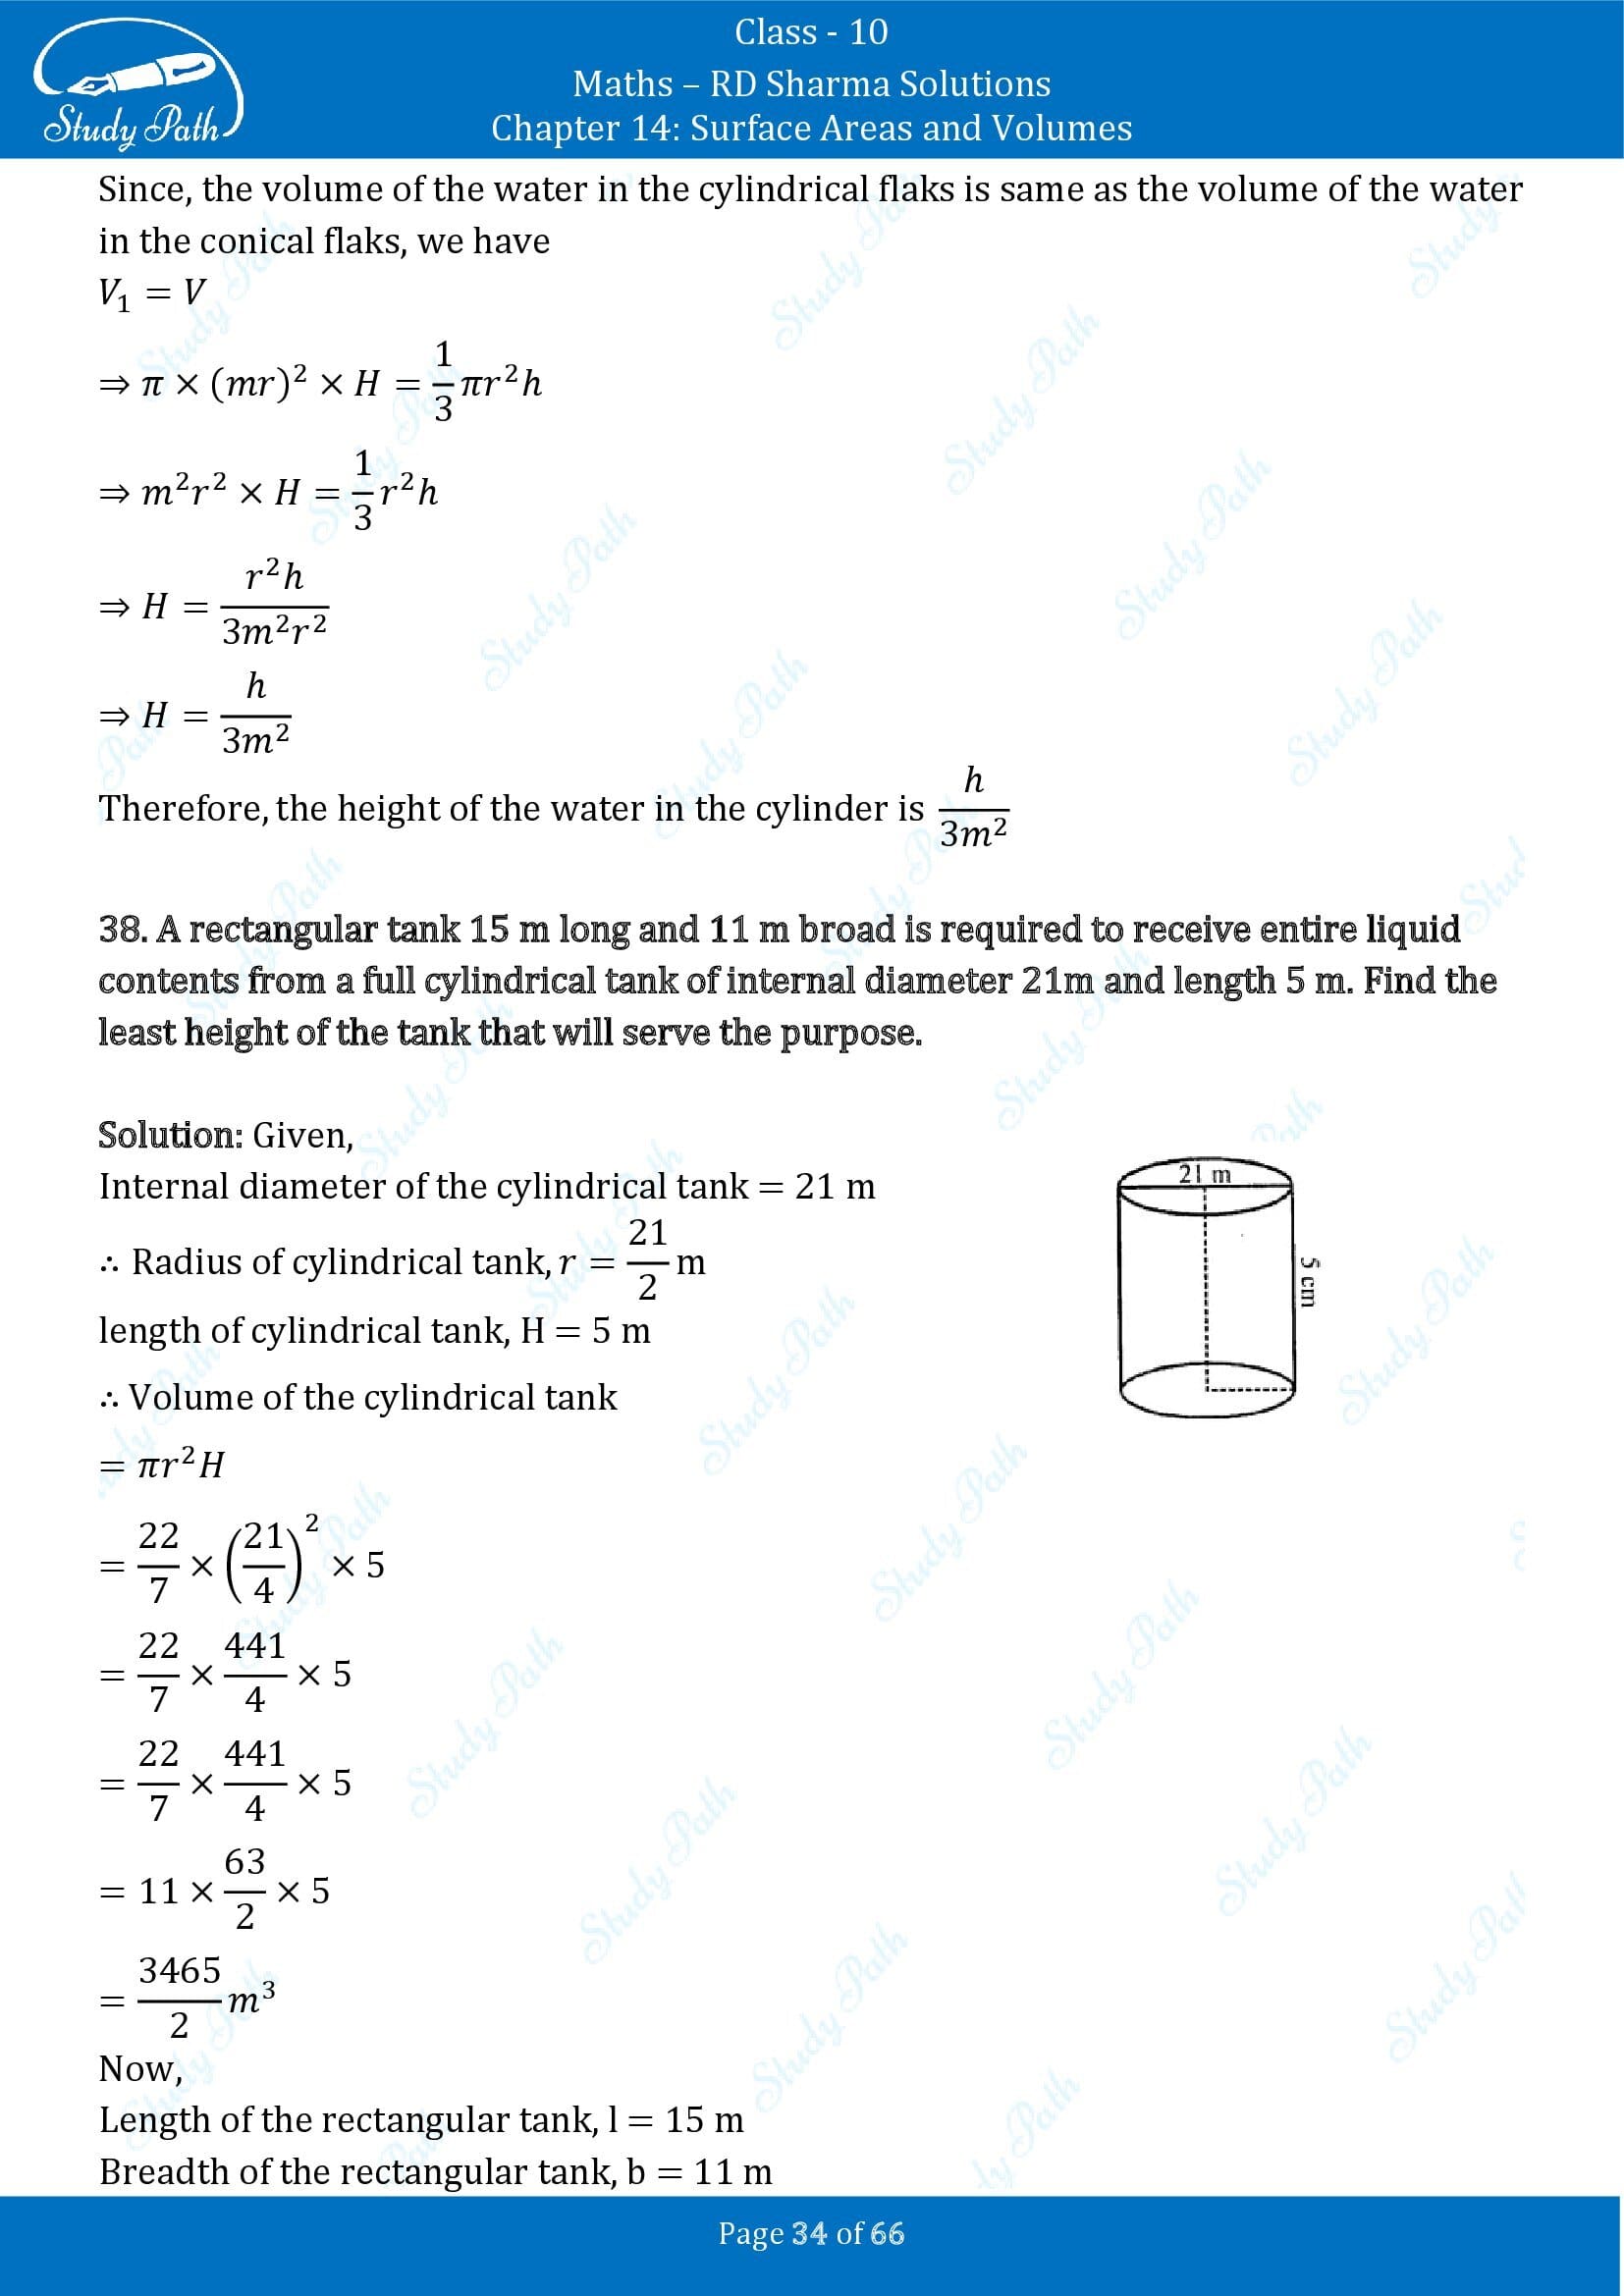 RD Sharma Solutions Class 10 Chapter 14 Surface Areas and Volumes Exercise 14.1 00034